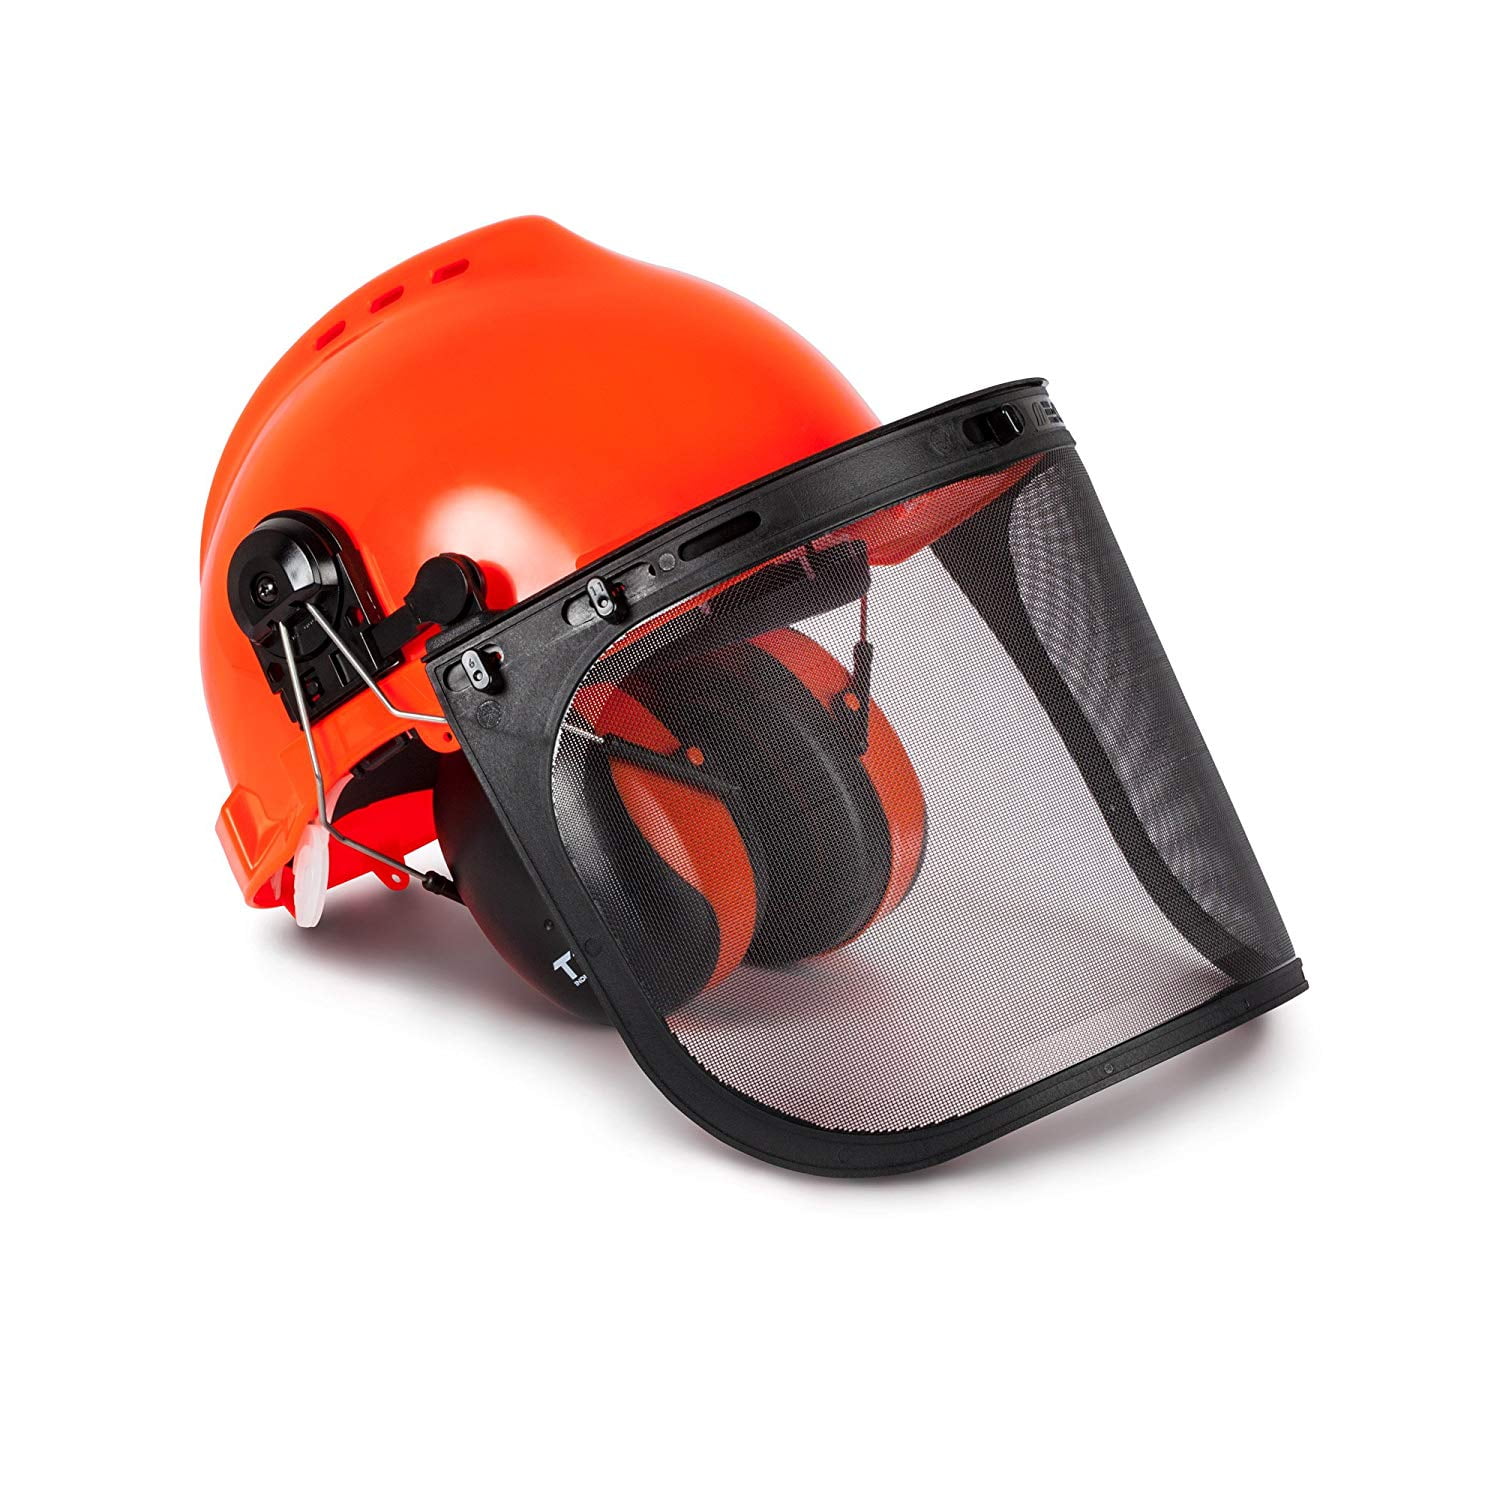 Forestry Safety Helmet and Hearing Protection System, 5 in 1 safety